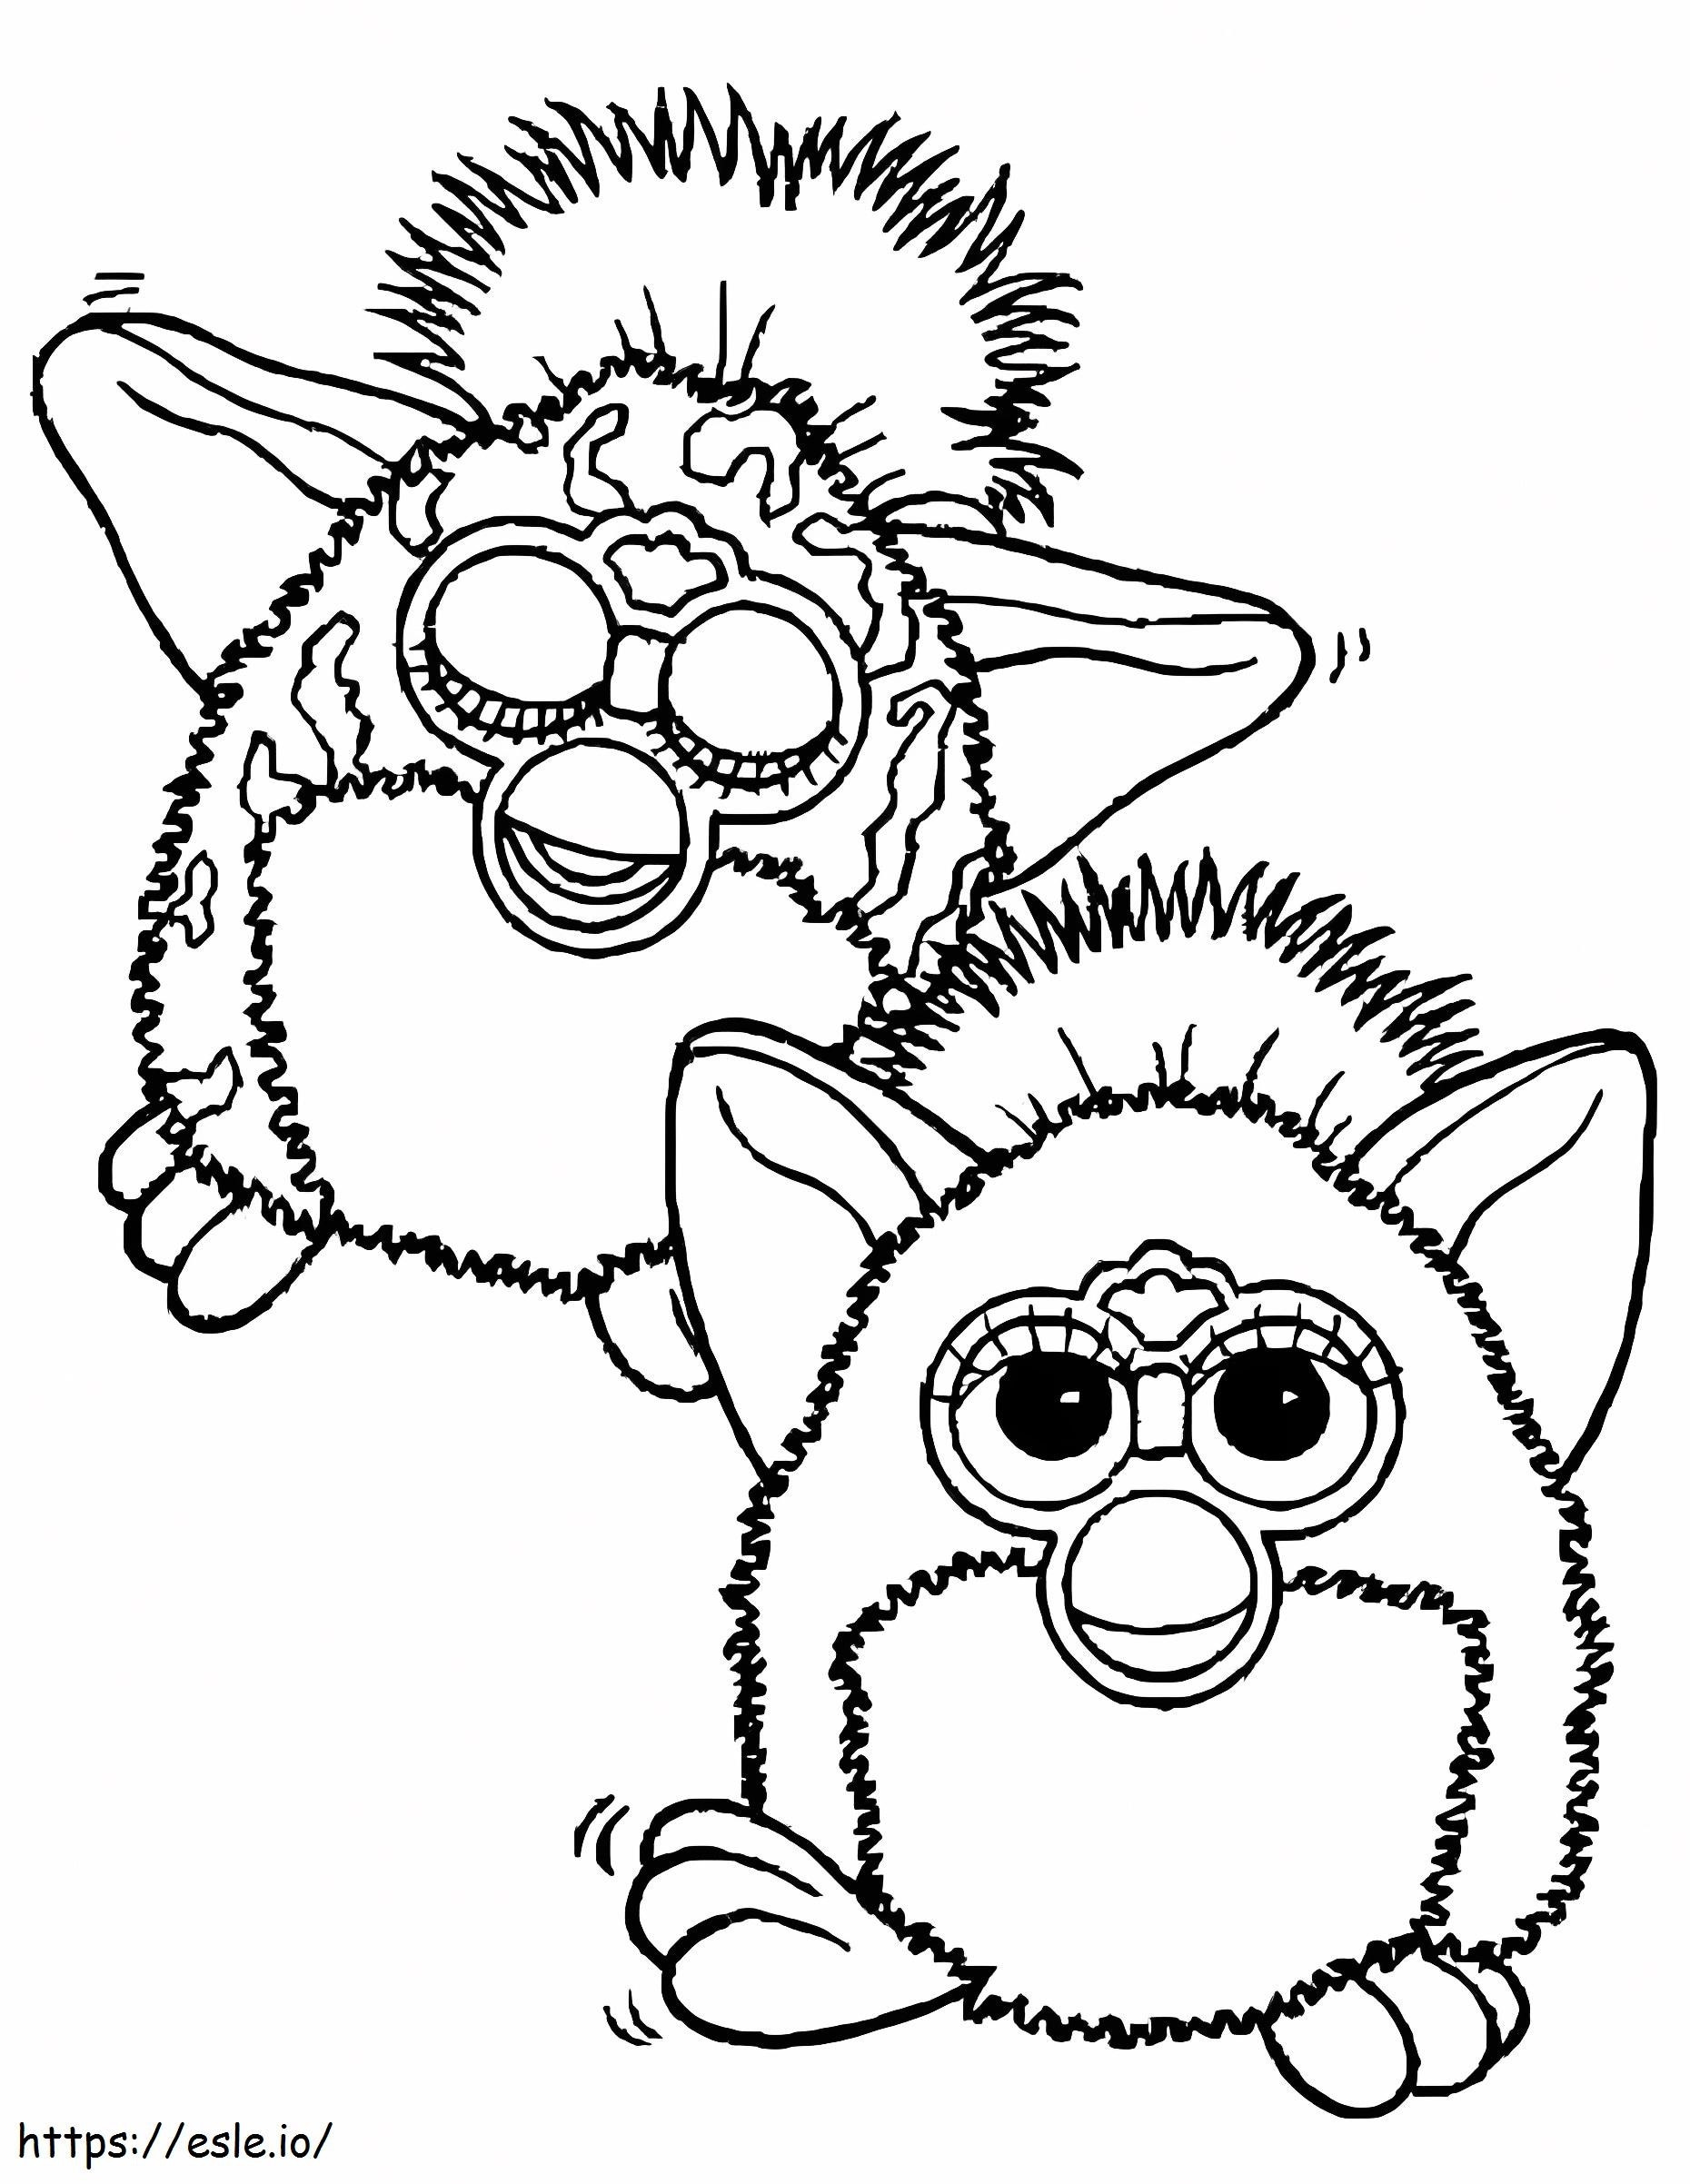 Two Furby coloring page